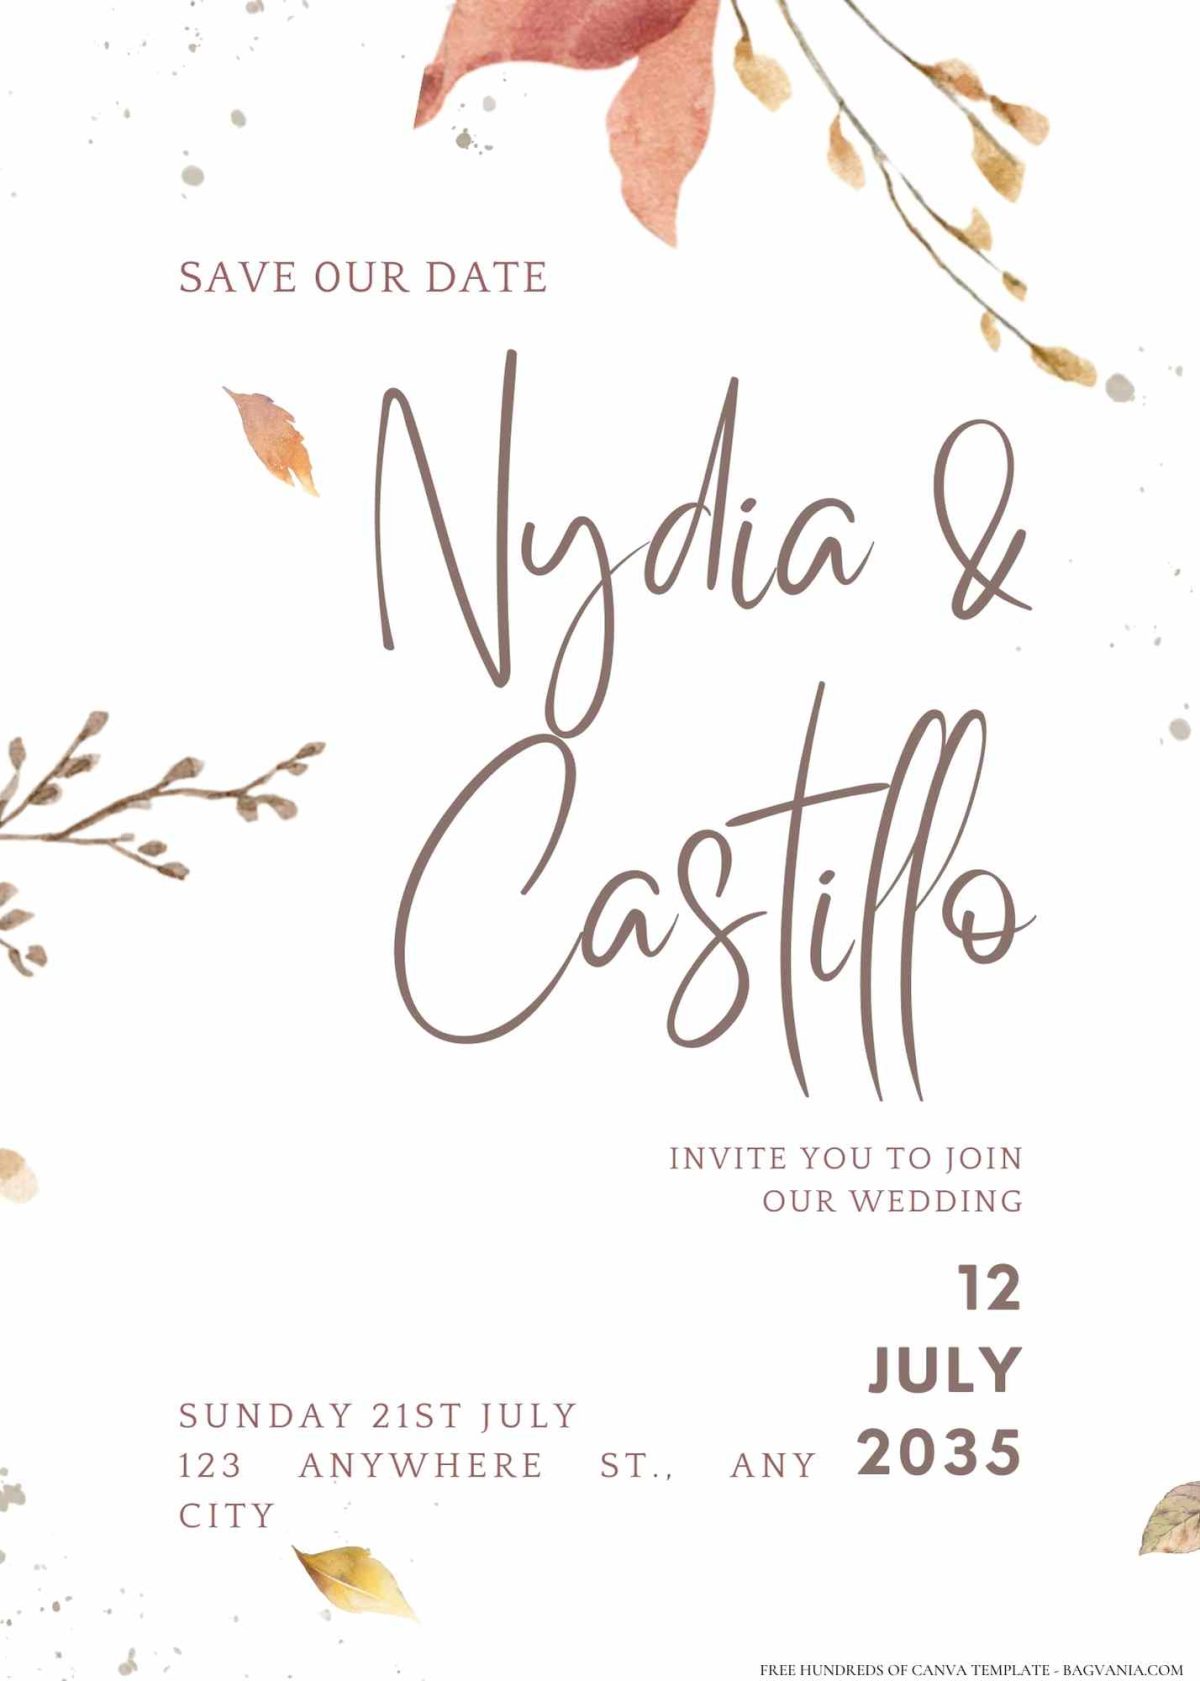 FREE Editable Watercolor Leaves Branches Wedding Invitation